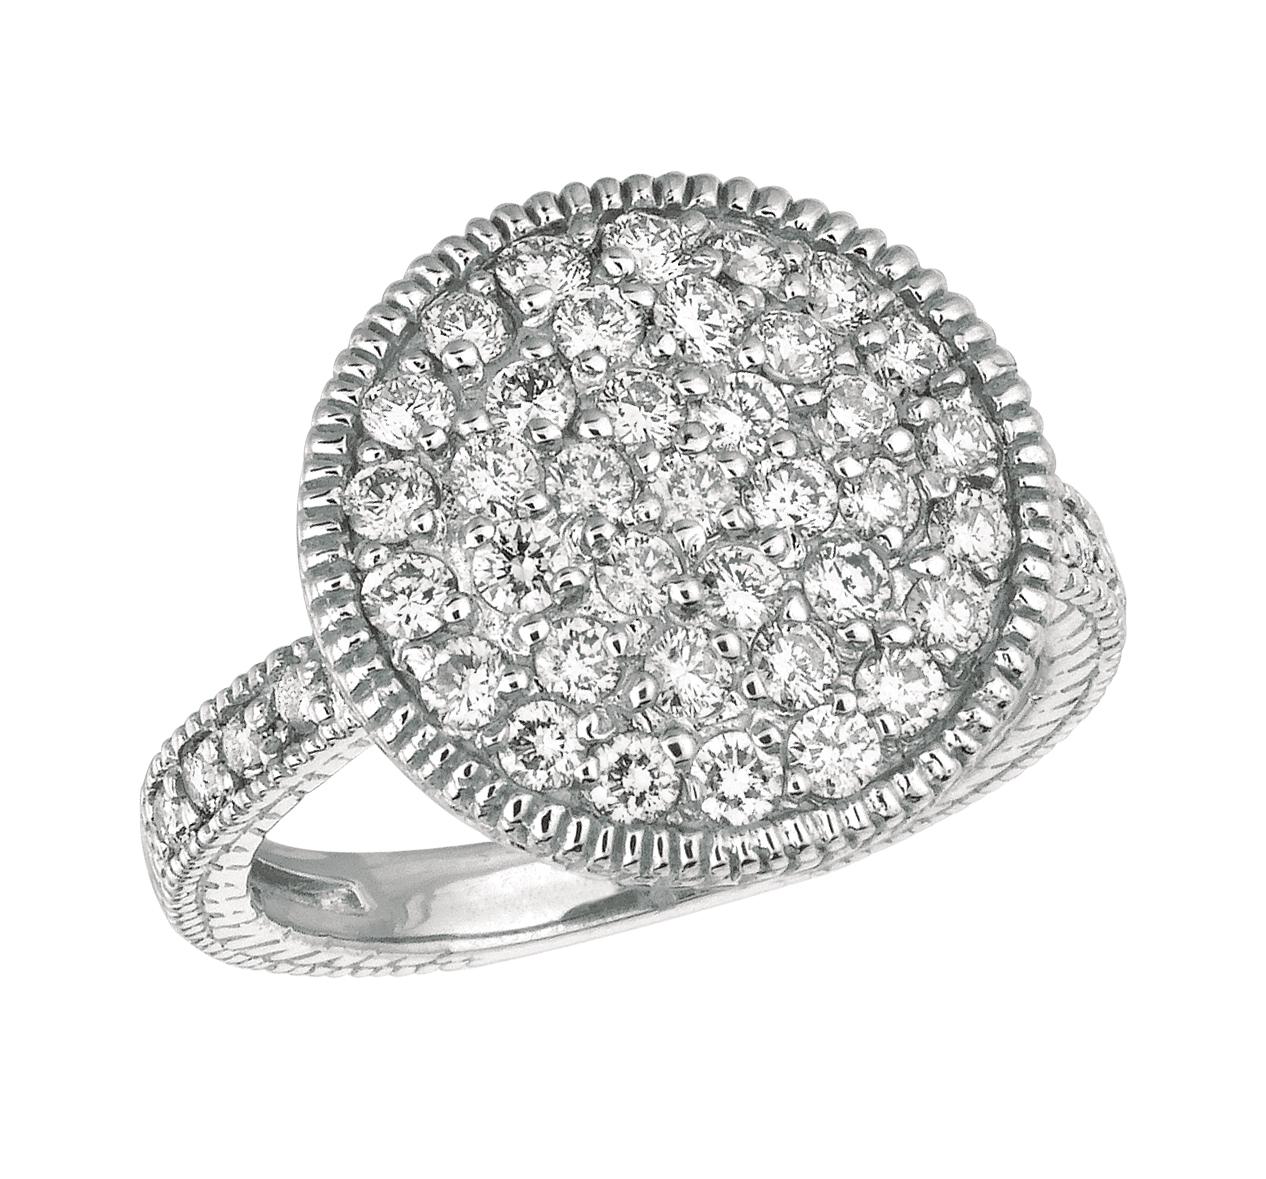 
Signature Collection 1.51 Ct Natural Round Cut Diamond Ring G SI 14K White Gold

    100% Natural Diamonds, Not Enhanced in any way 
    1.51CT
    Color G-H 
    Clarity SI  
    14K White Gold,  Prong style,   4.9 grams
    5/8 inch in width
   